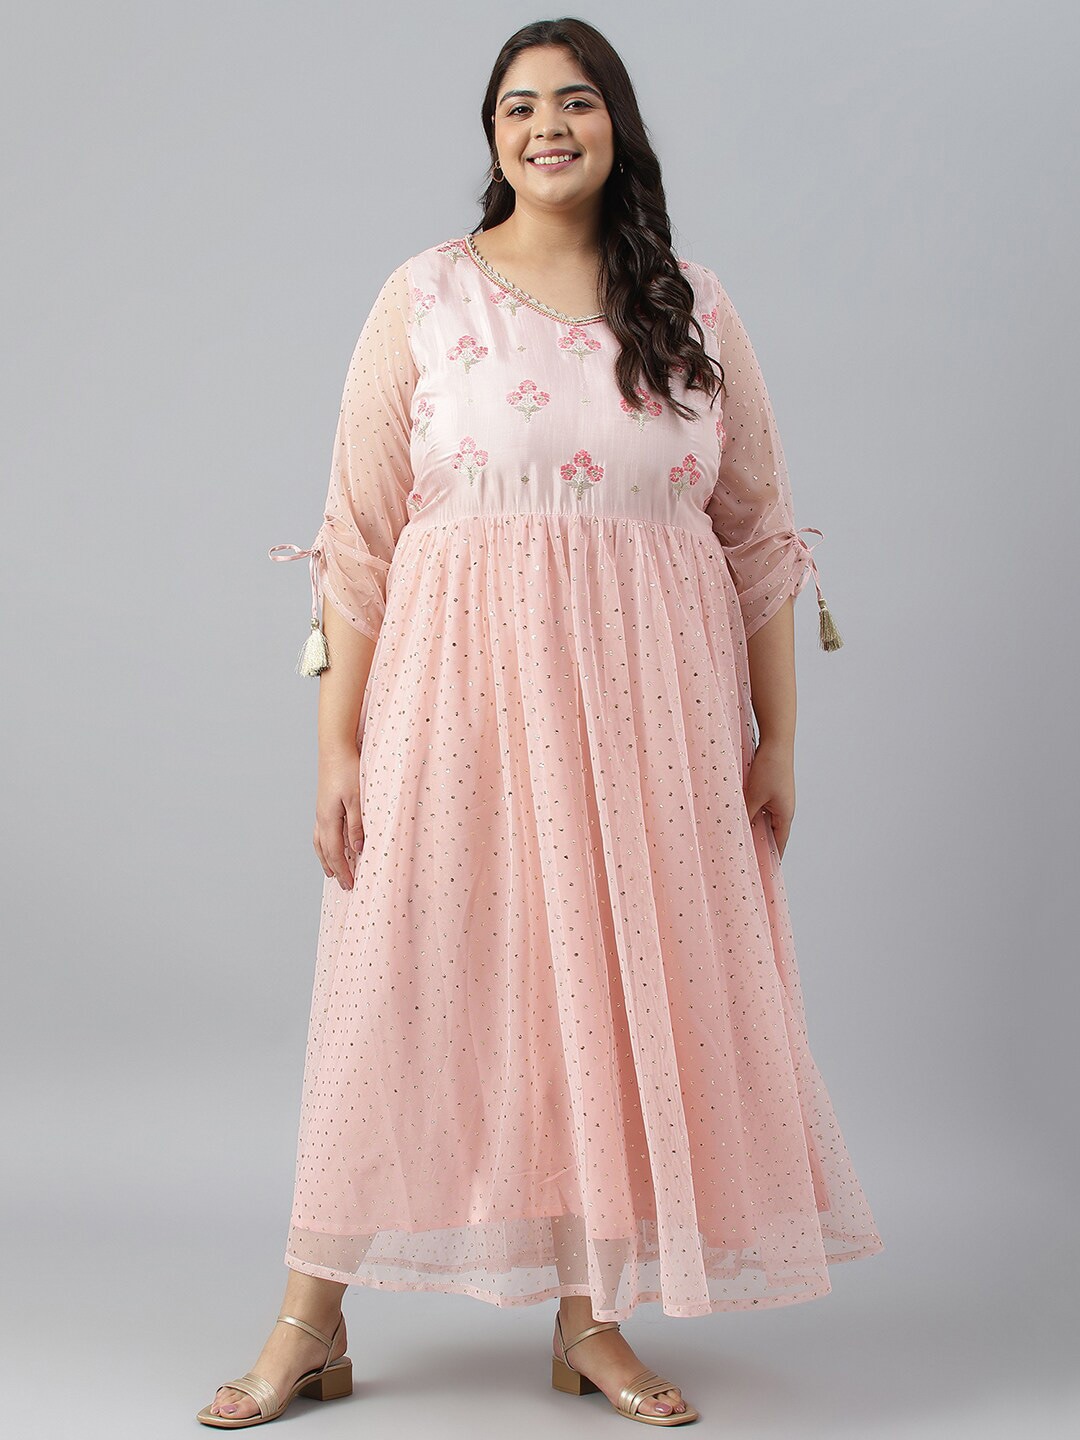 AURELIA Plus Size Floral Embroidered Chiffon Maxi Fit & Flare Dress Price in India